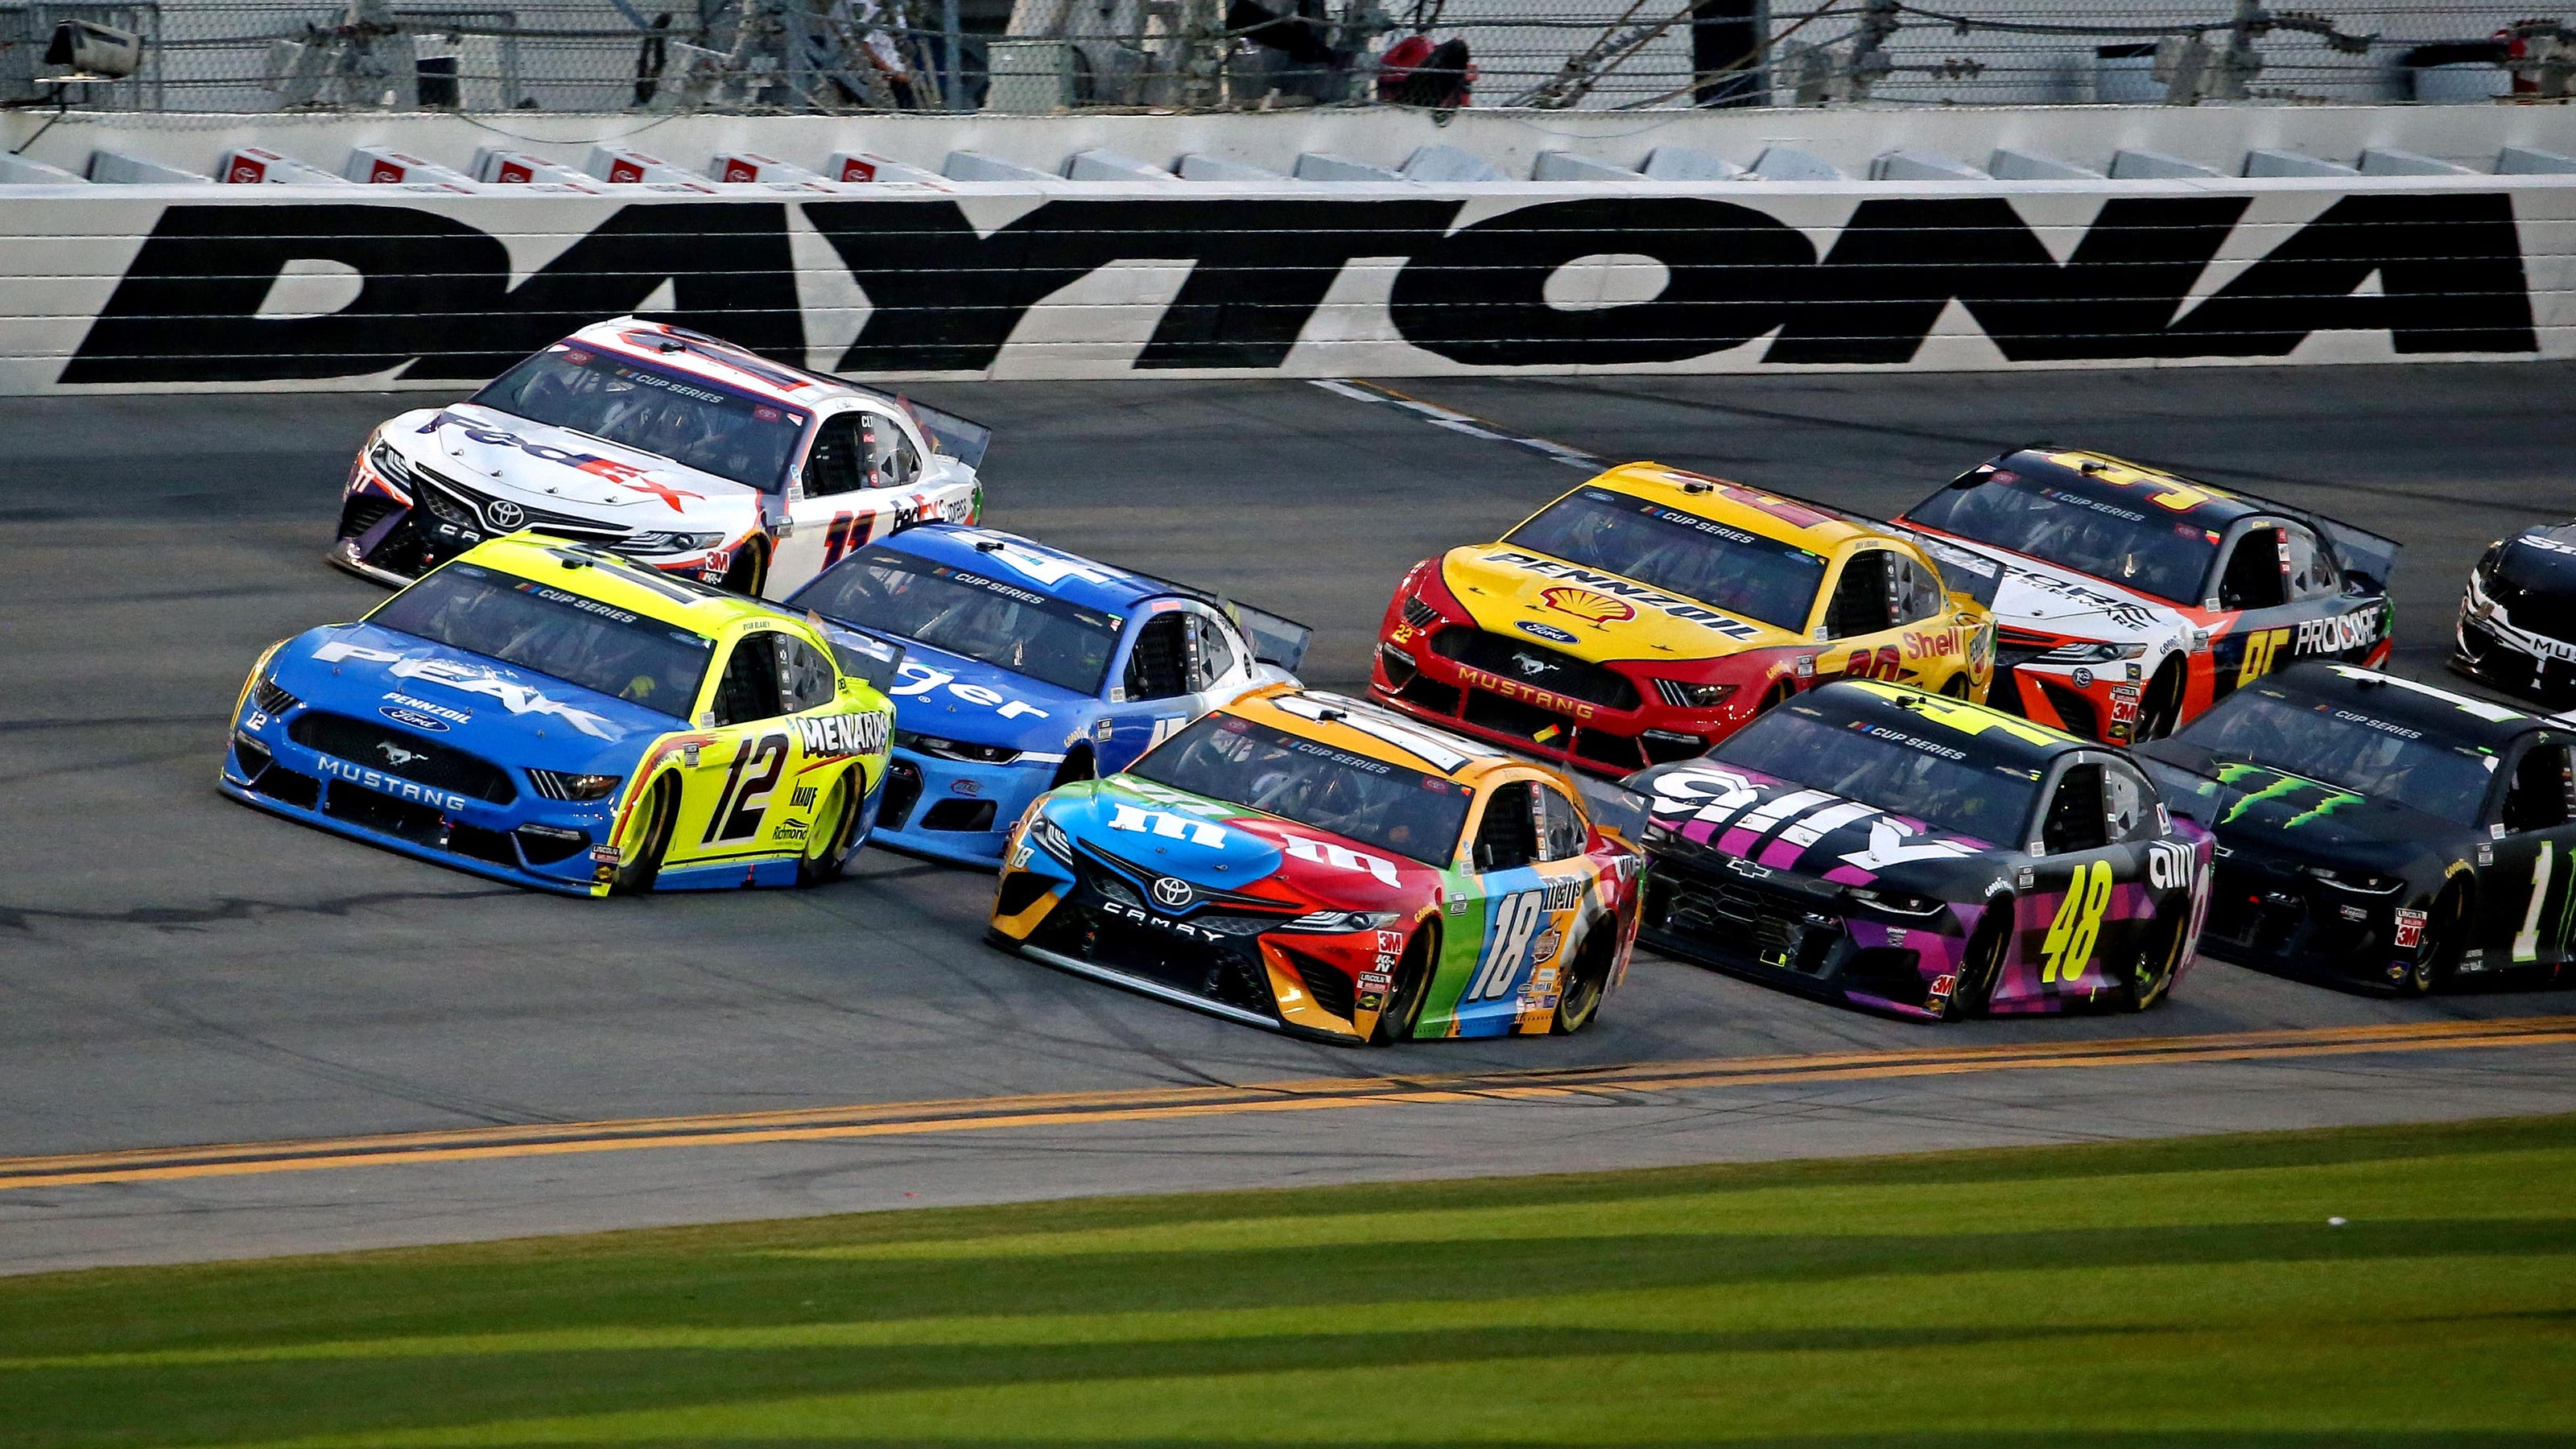 Daytona 500 and Speedweeks 2021 schedule announced by NASCAR